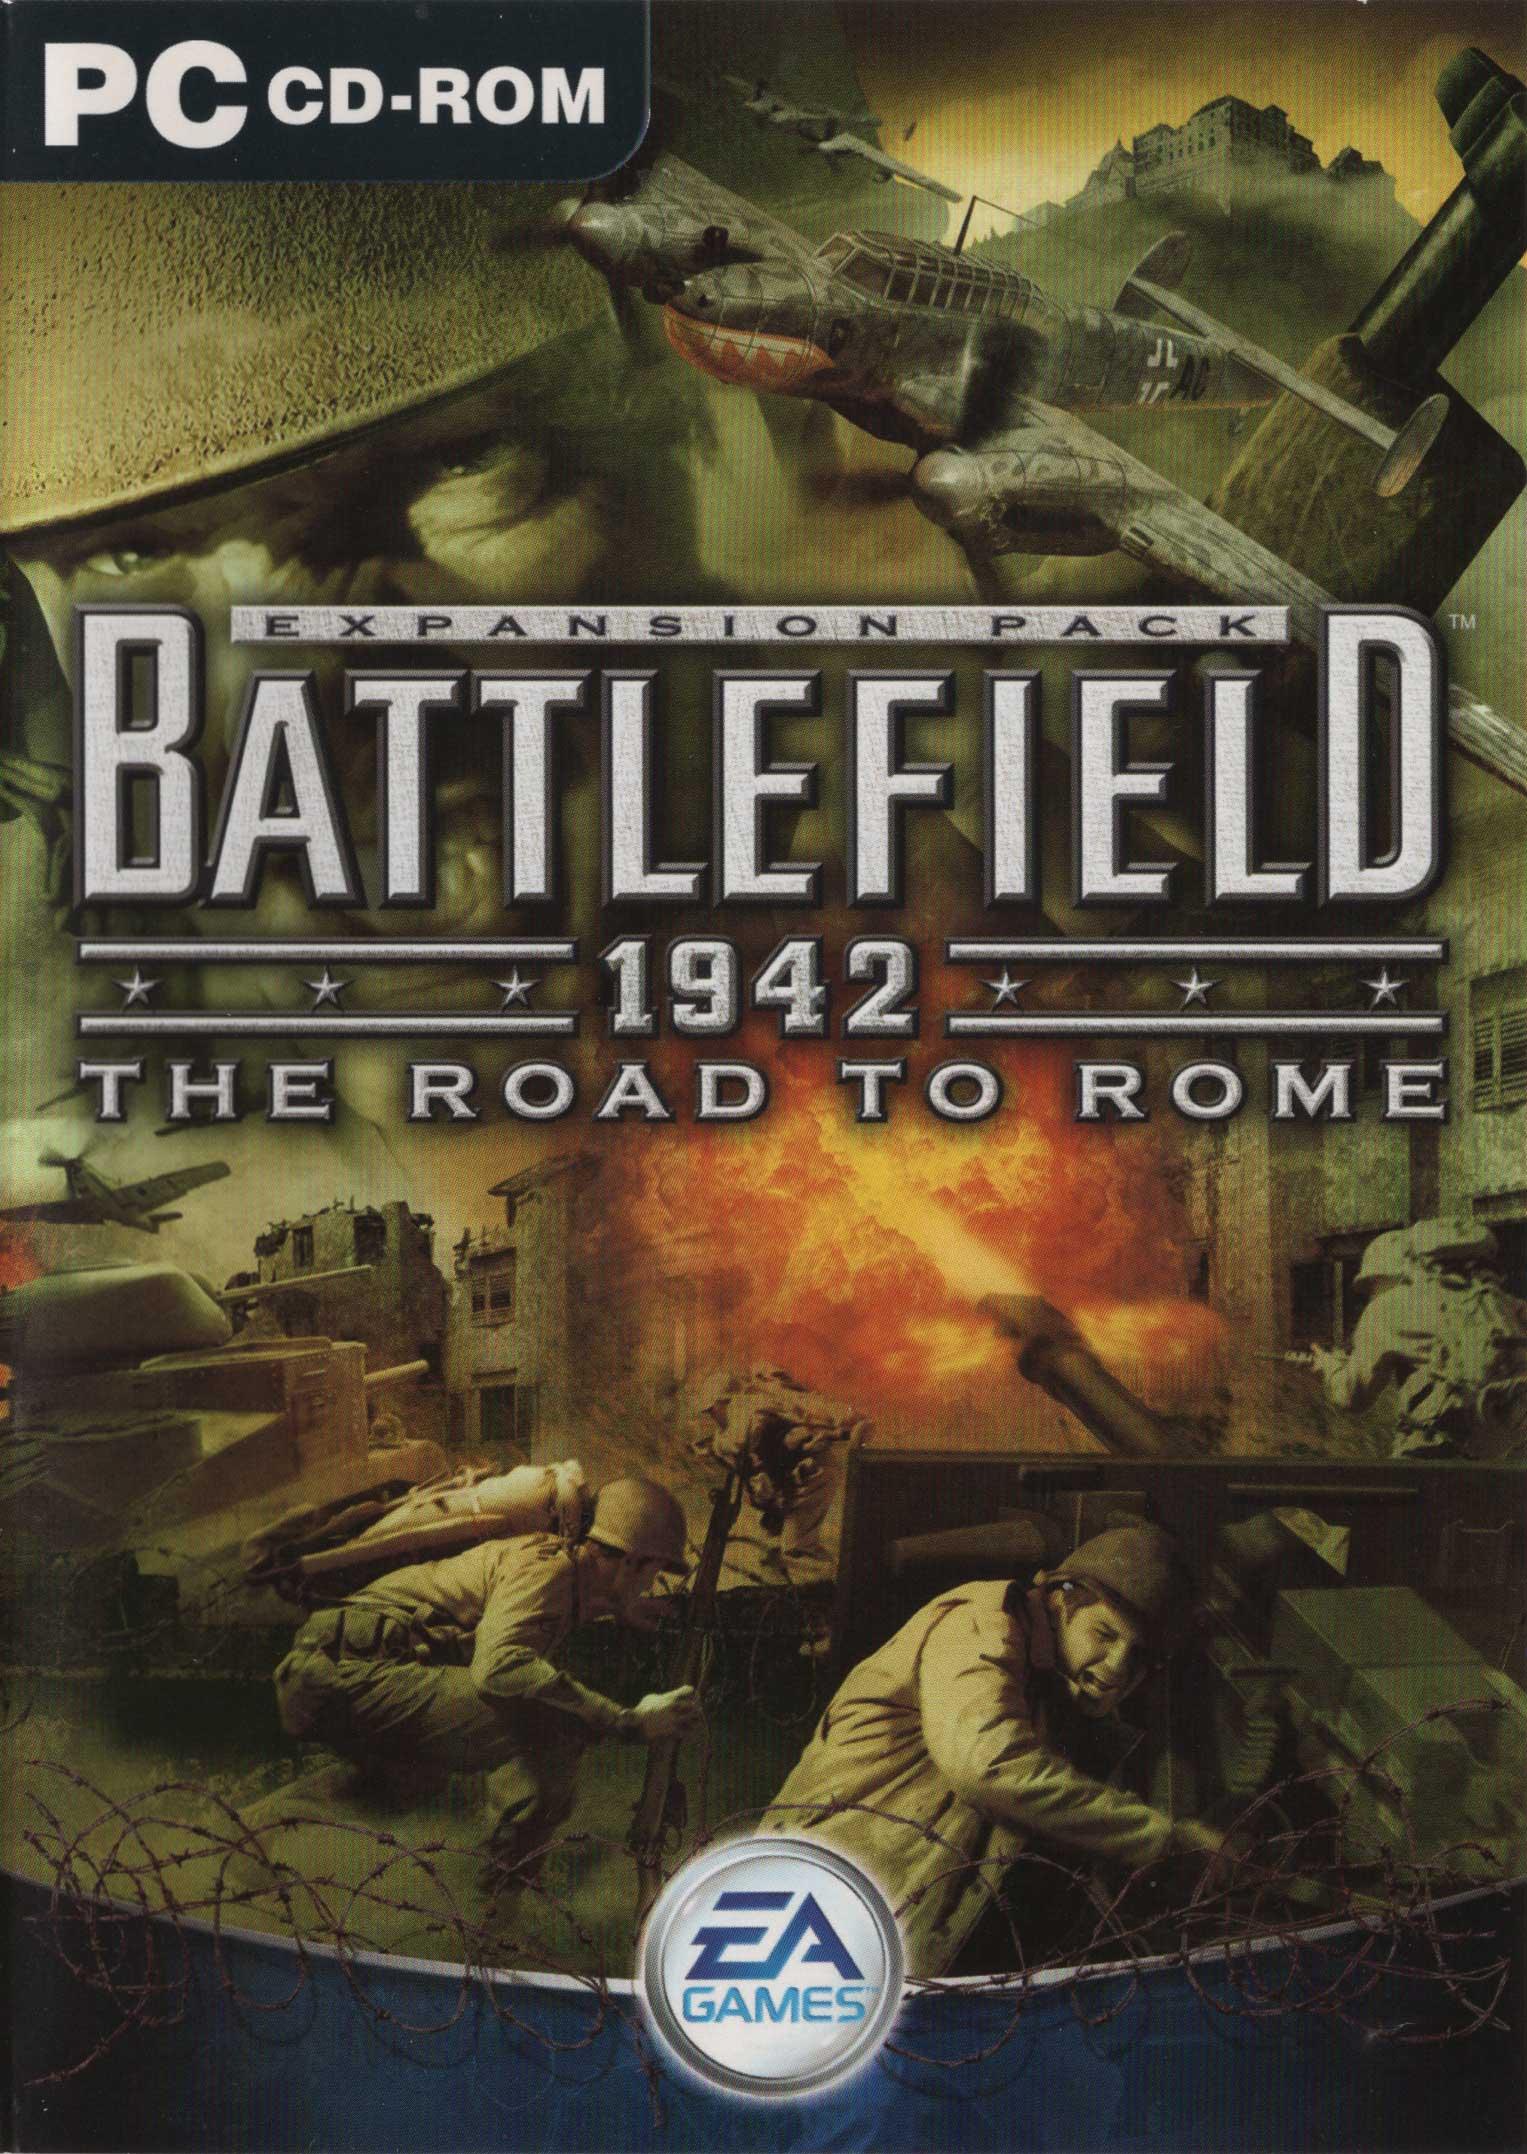 Expansion Pack Battlefield 1942 Road To Rome - Classic Windows PC Game